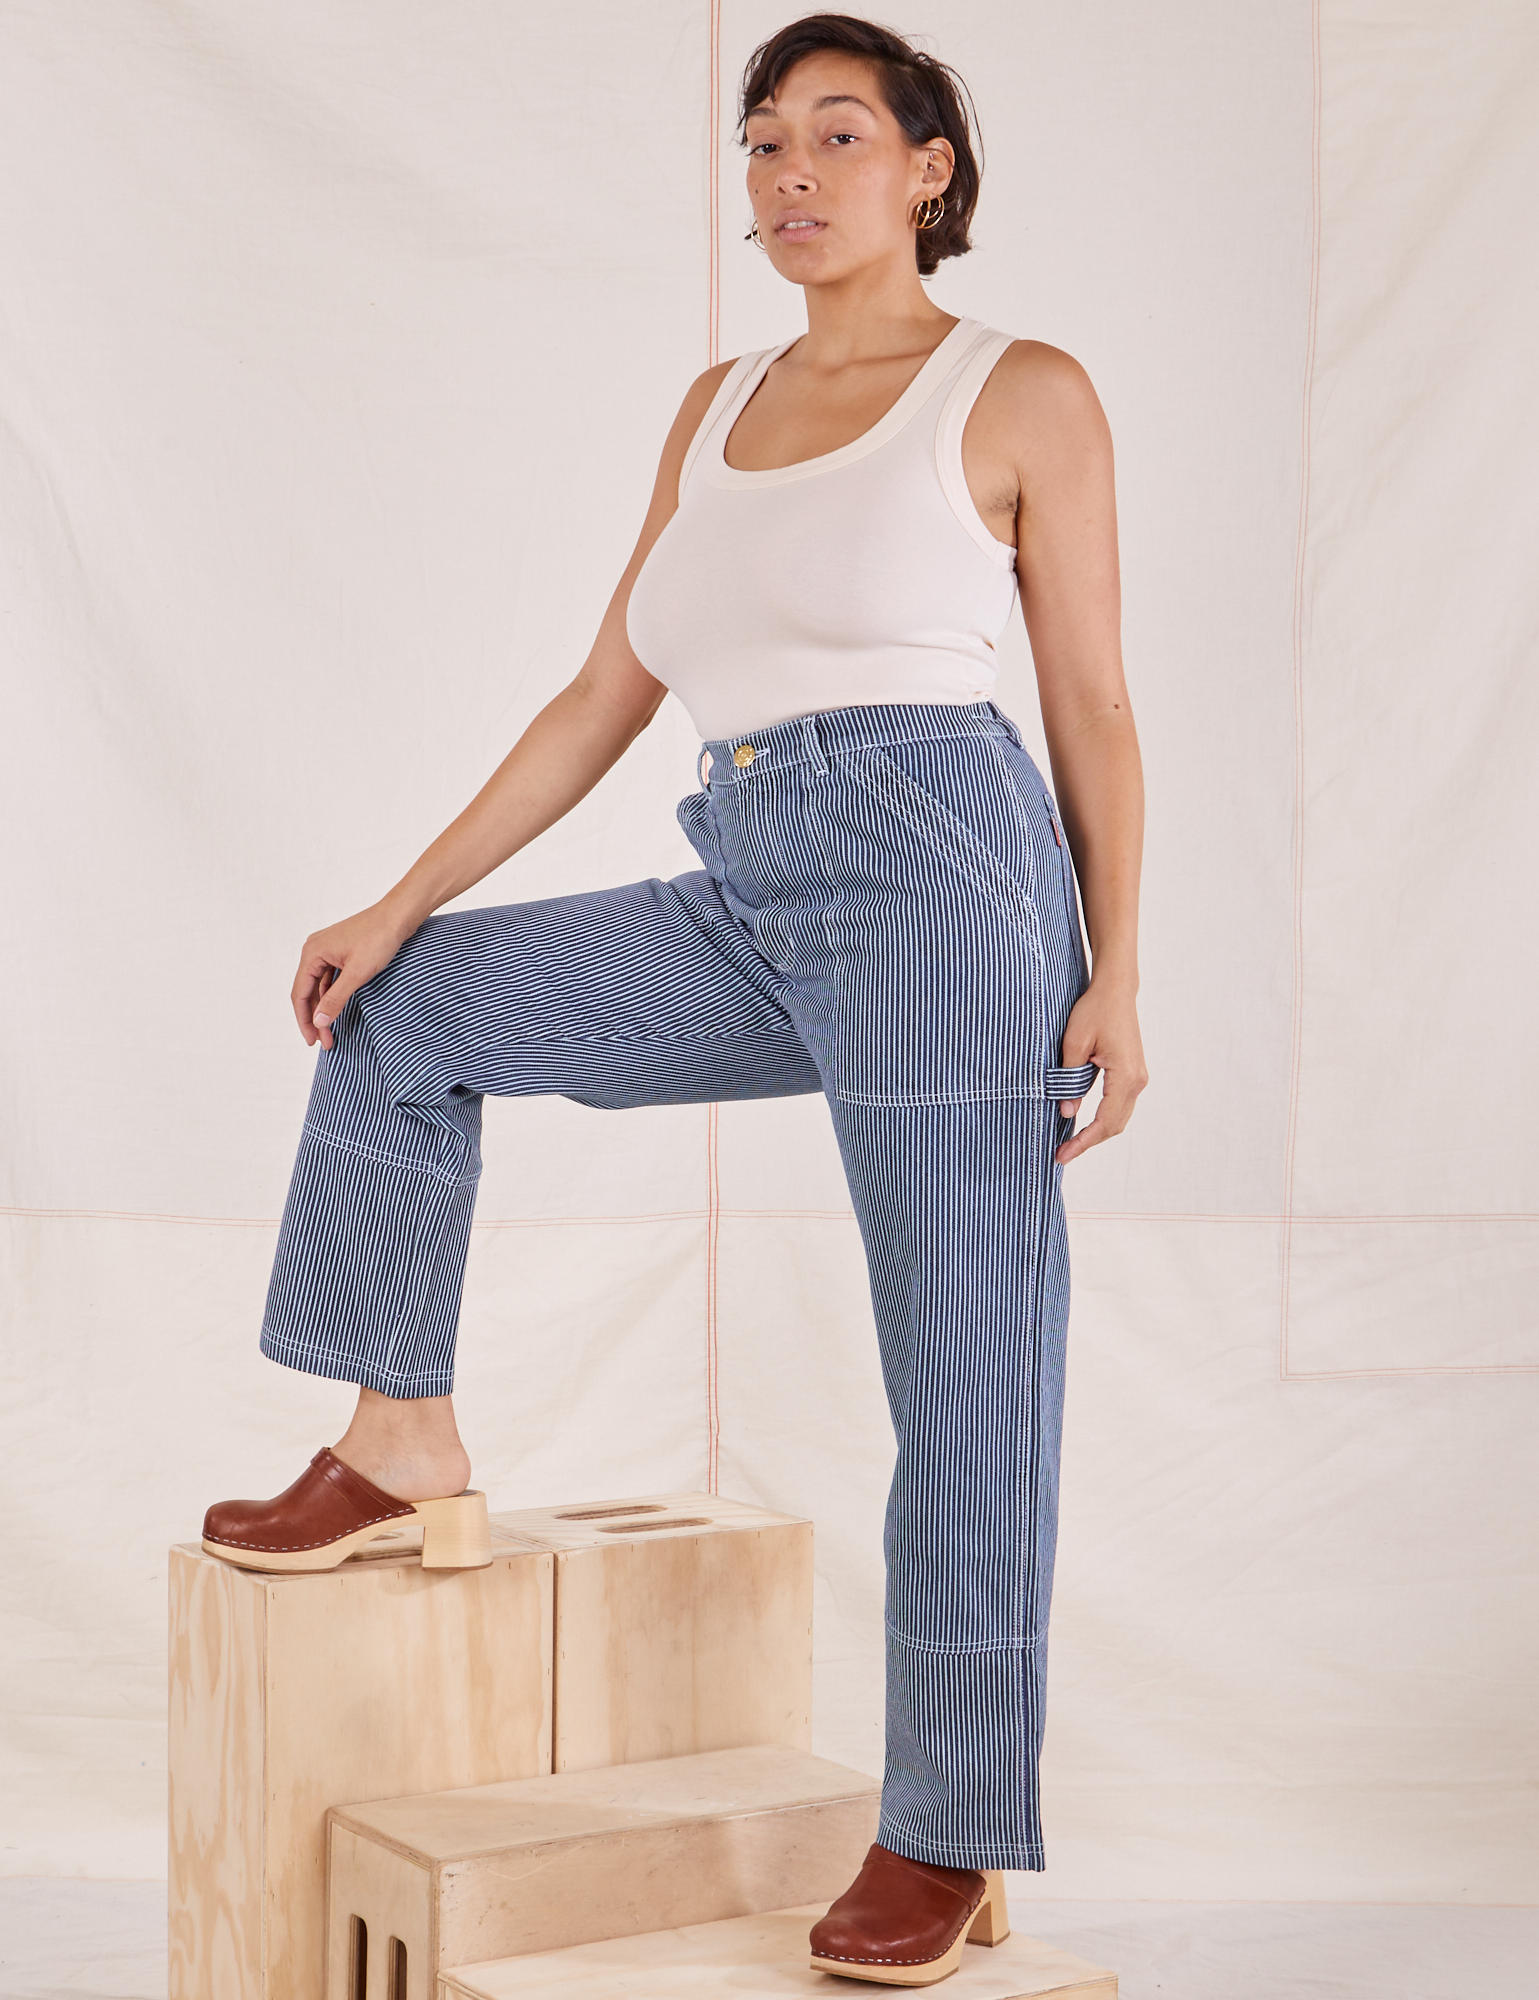 Tiara is wearing Carpenter Jeans in Railroad Stripes and vintage off-white Tank Top